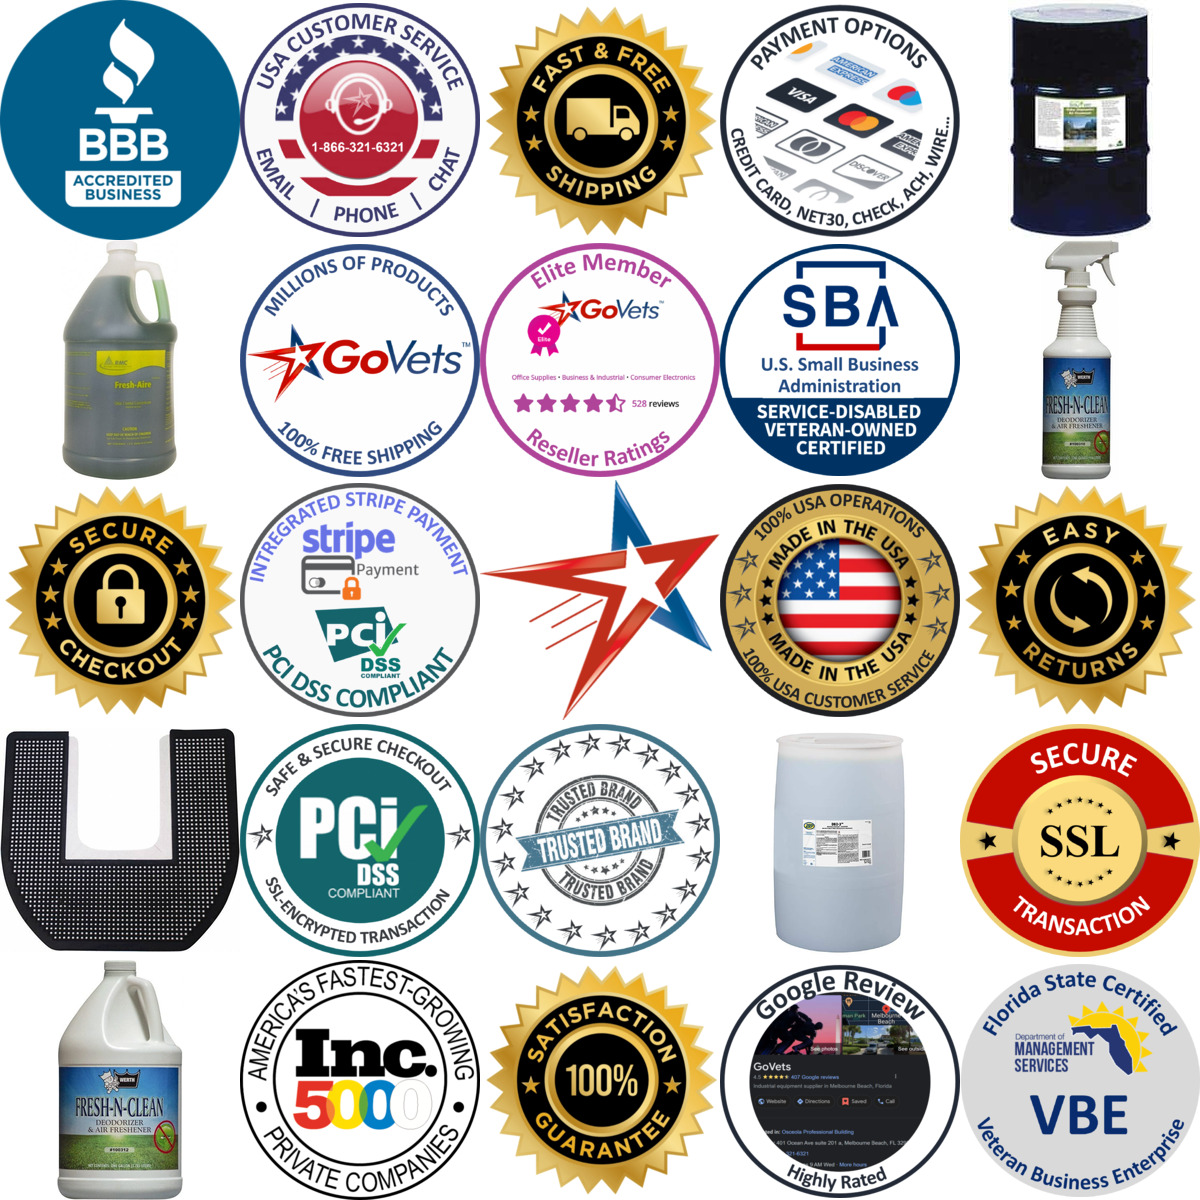 A selection of All Purpose Cleaners and Degreasers products on GoVets